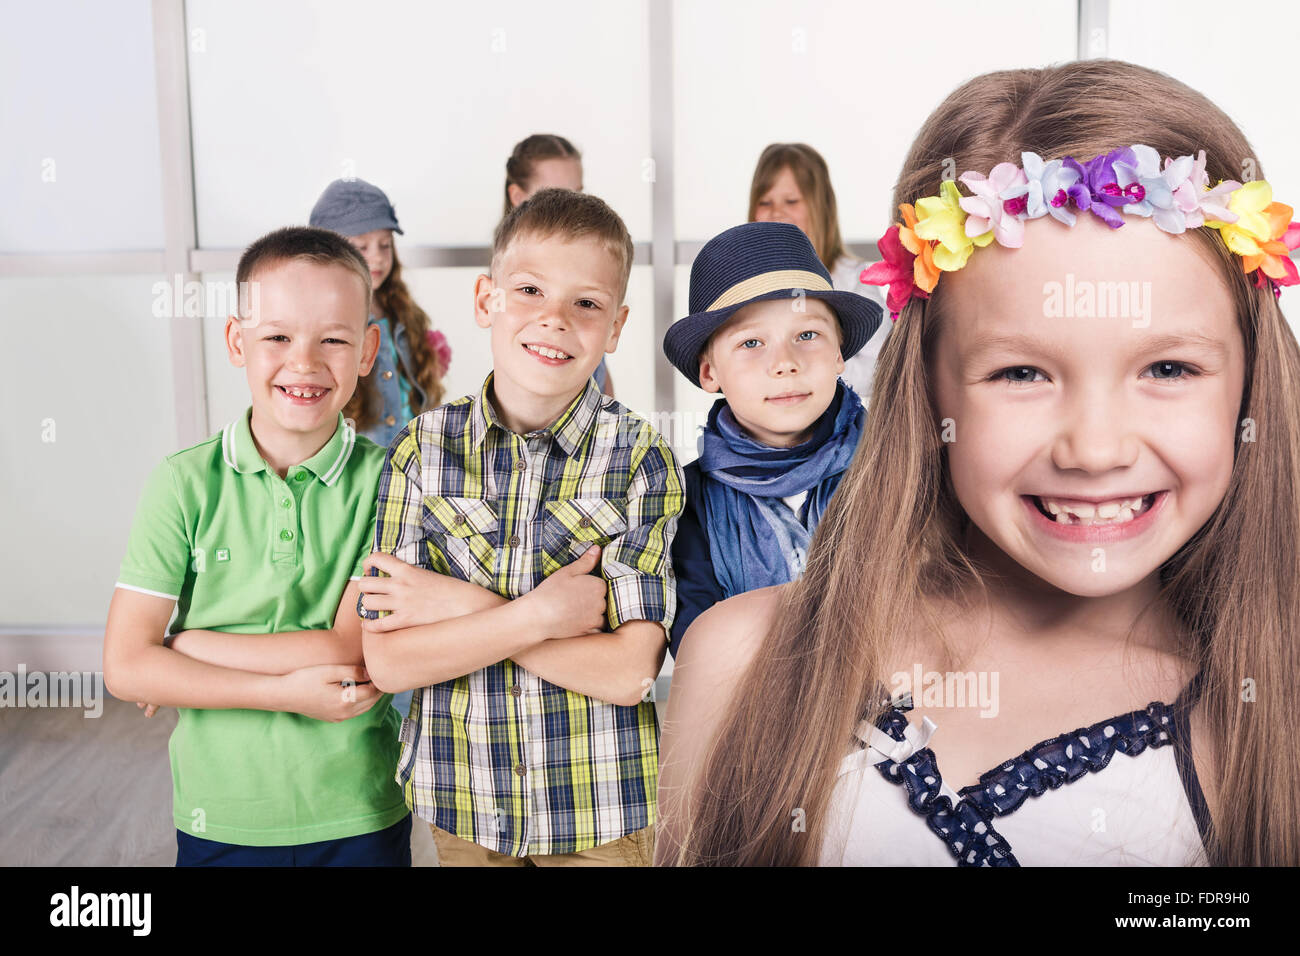 Group of smiling kids Stock Photo